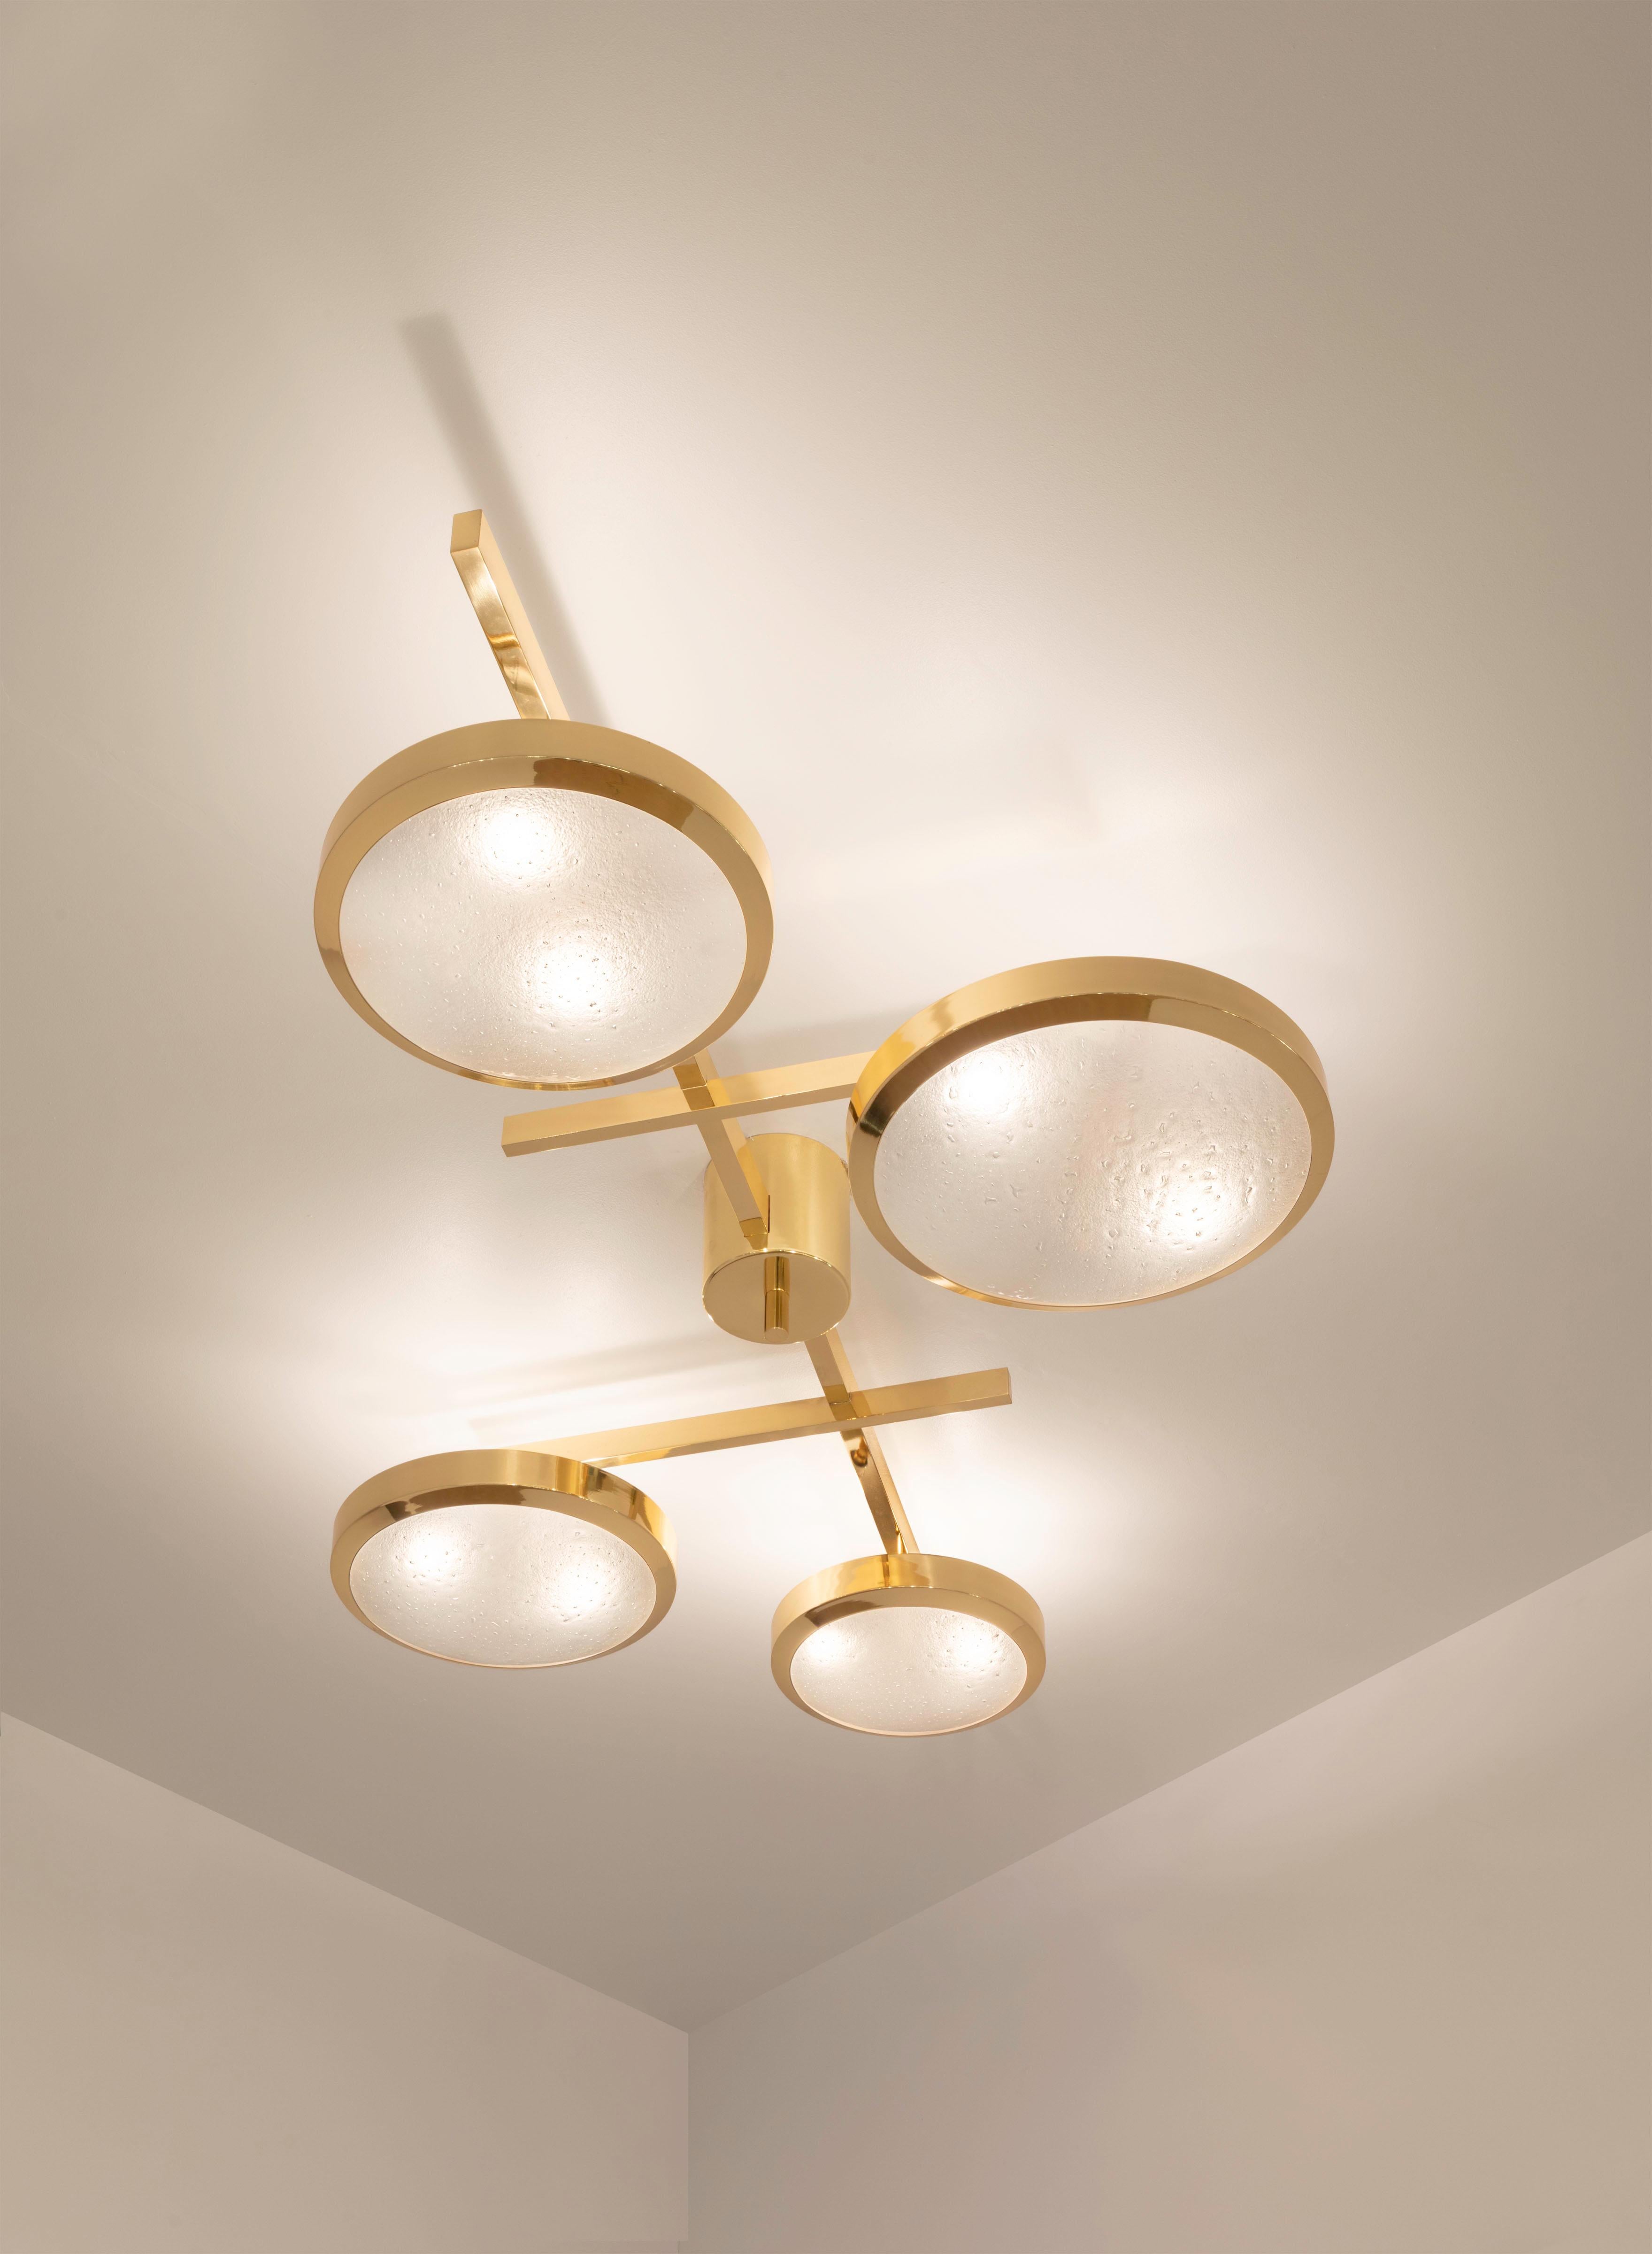 Italian Tetrix Ceiling Light by Gaspare Asaro - Polished Brass Finish For Sale